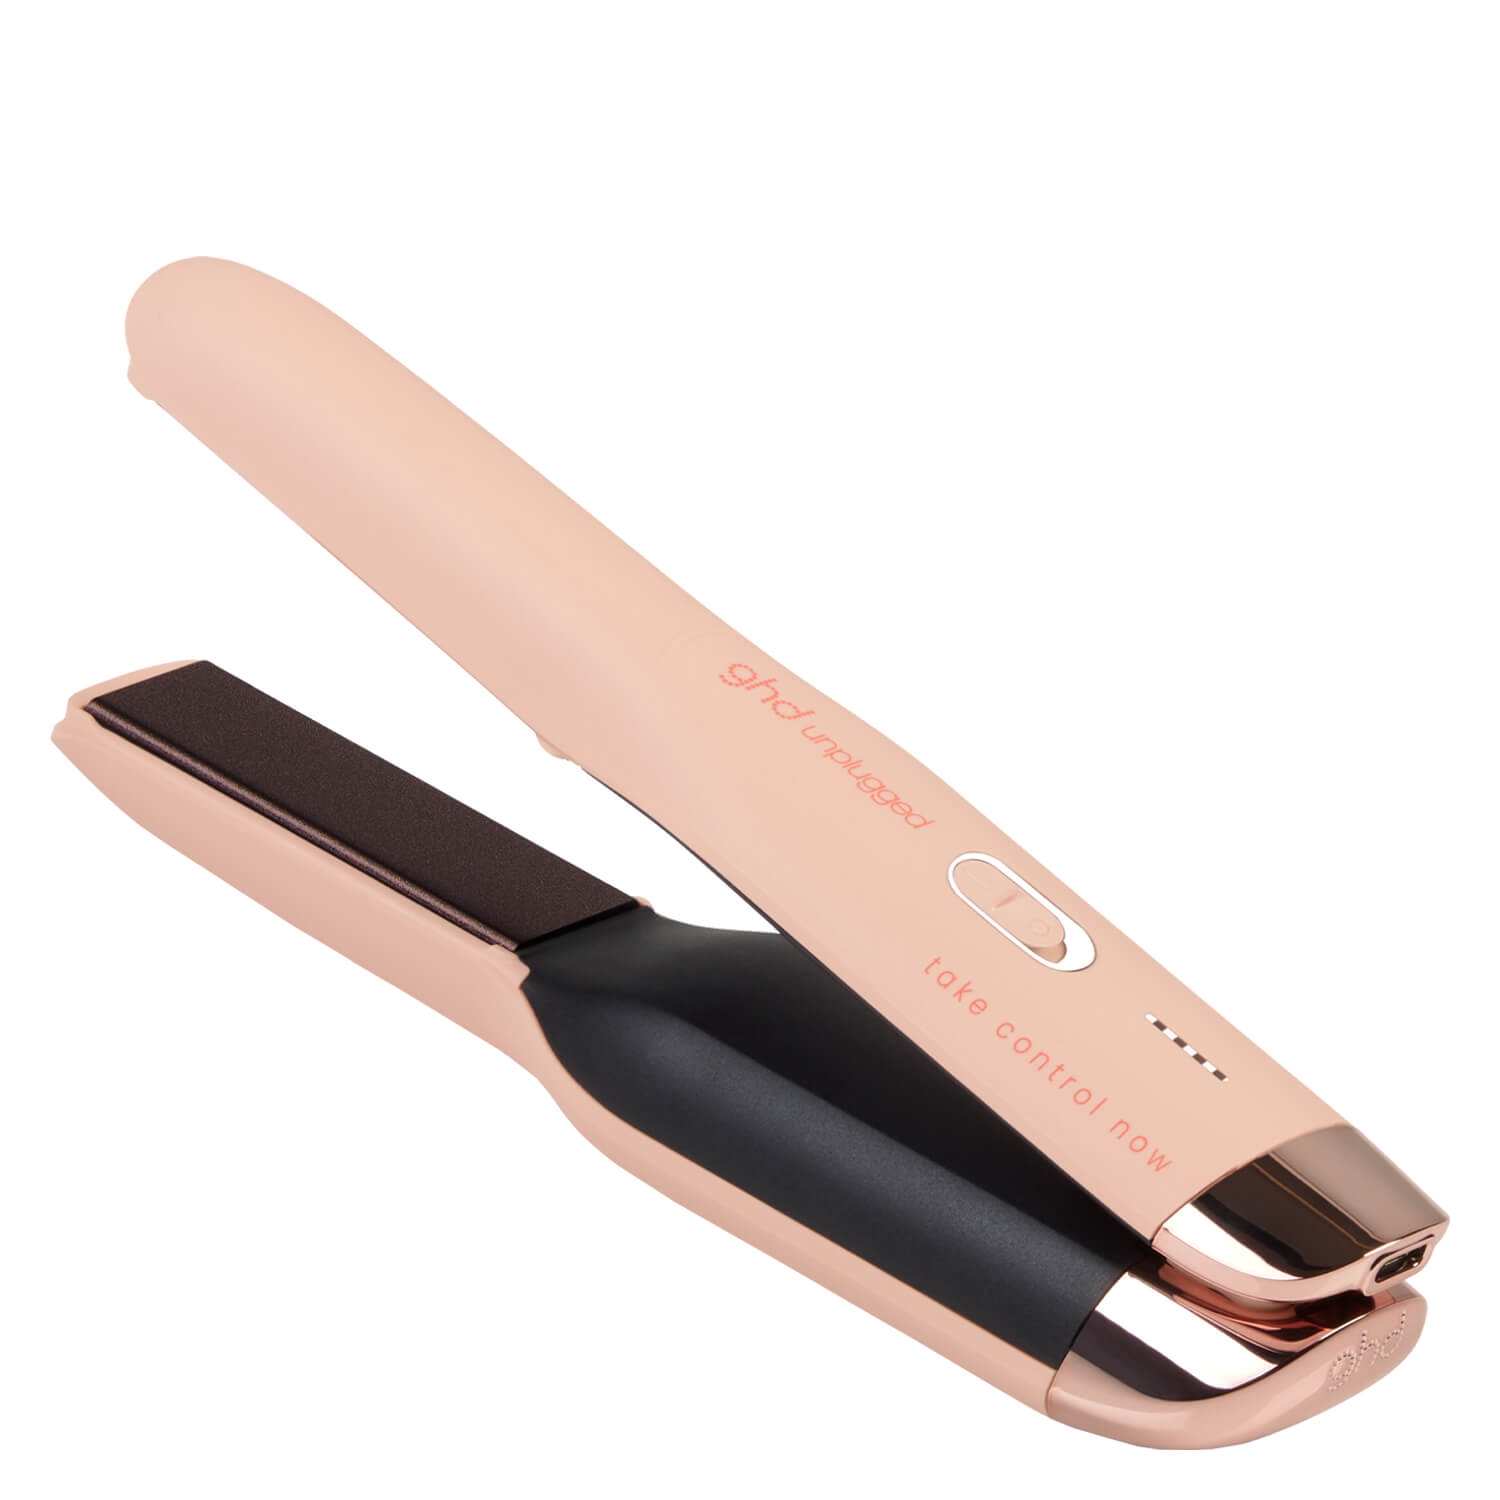 Image du produit de ghd Tools - Unplugged Cordless Styler Pink Peach Charity Edition